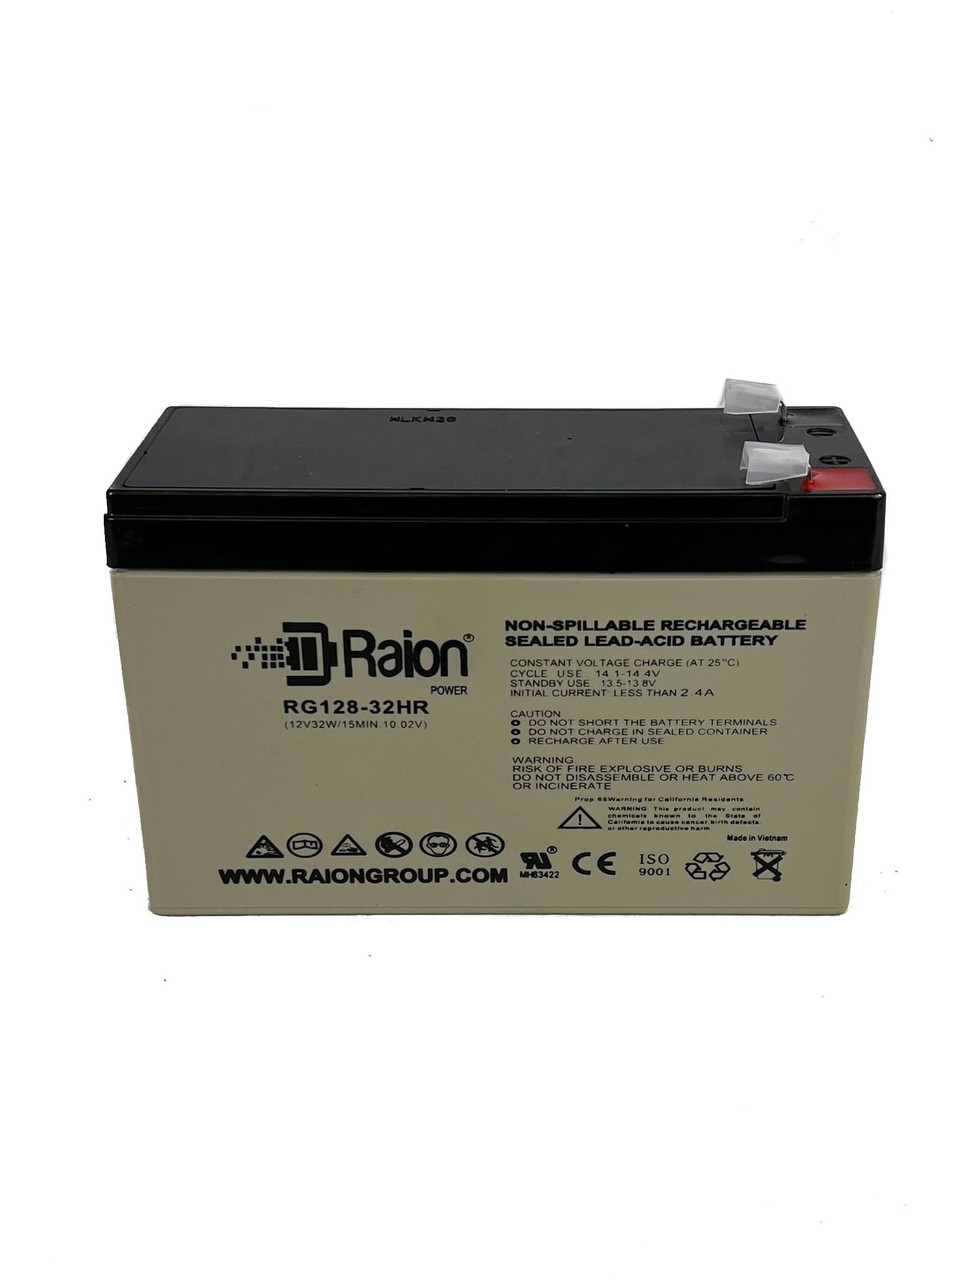 Raion Power RG128-32HR Replacement High Rate Battery Cartridge for Toshiba 1200 Series 5KVA OPT